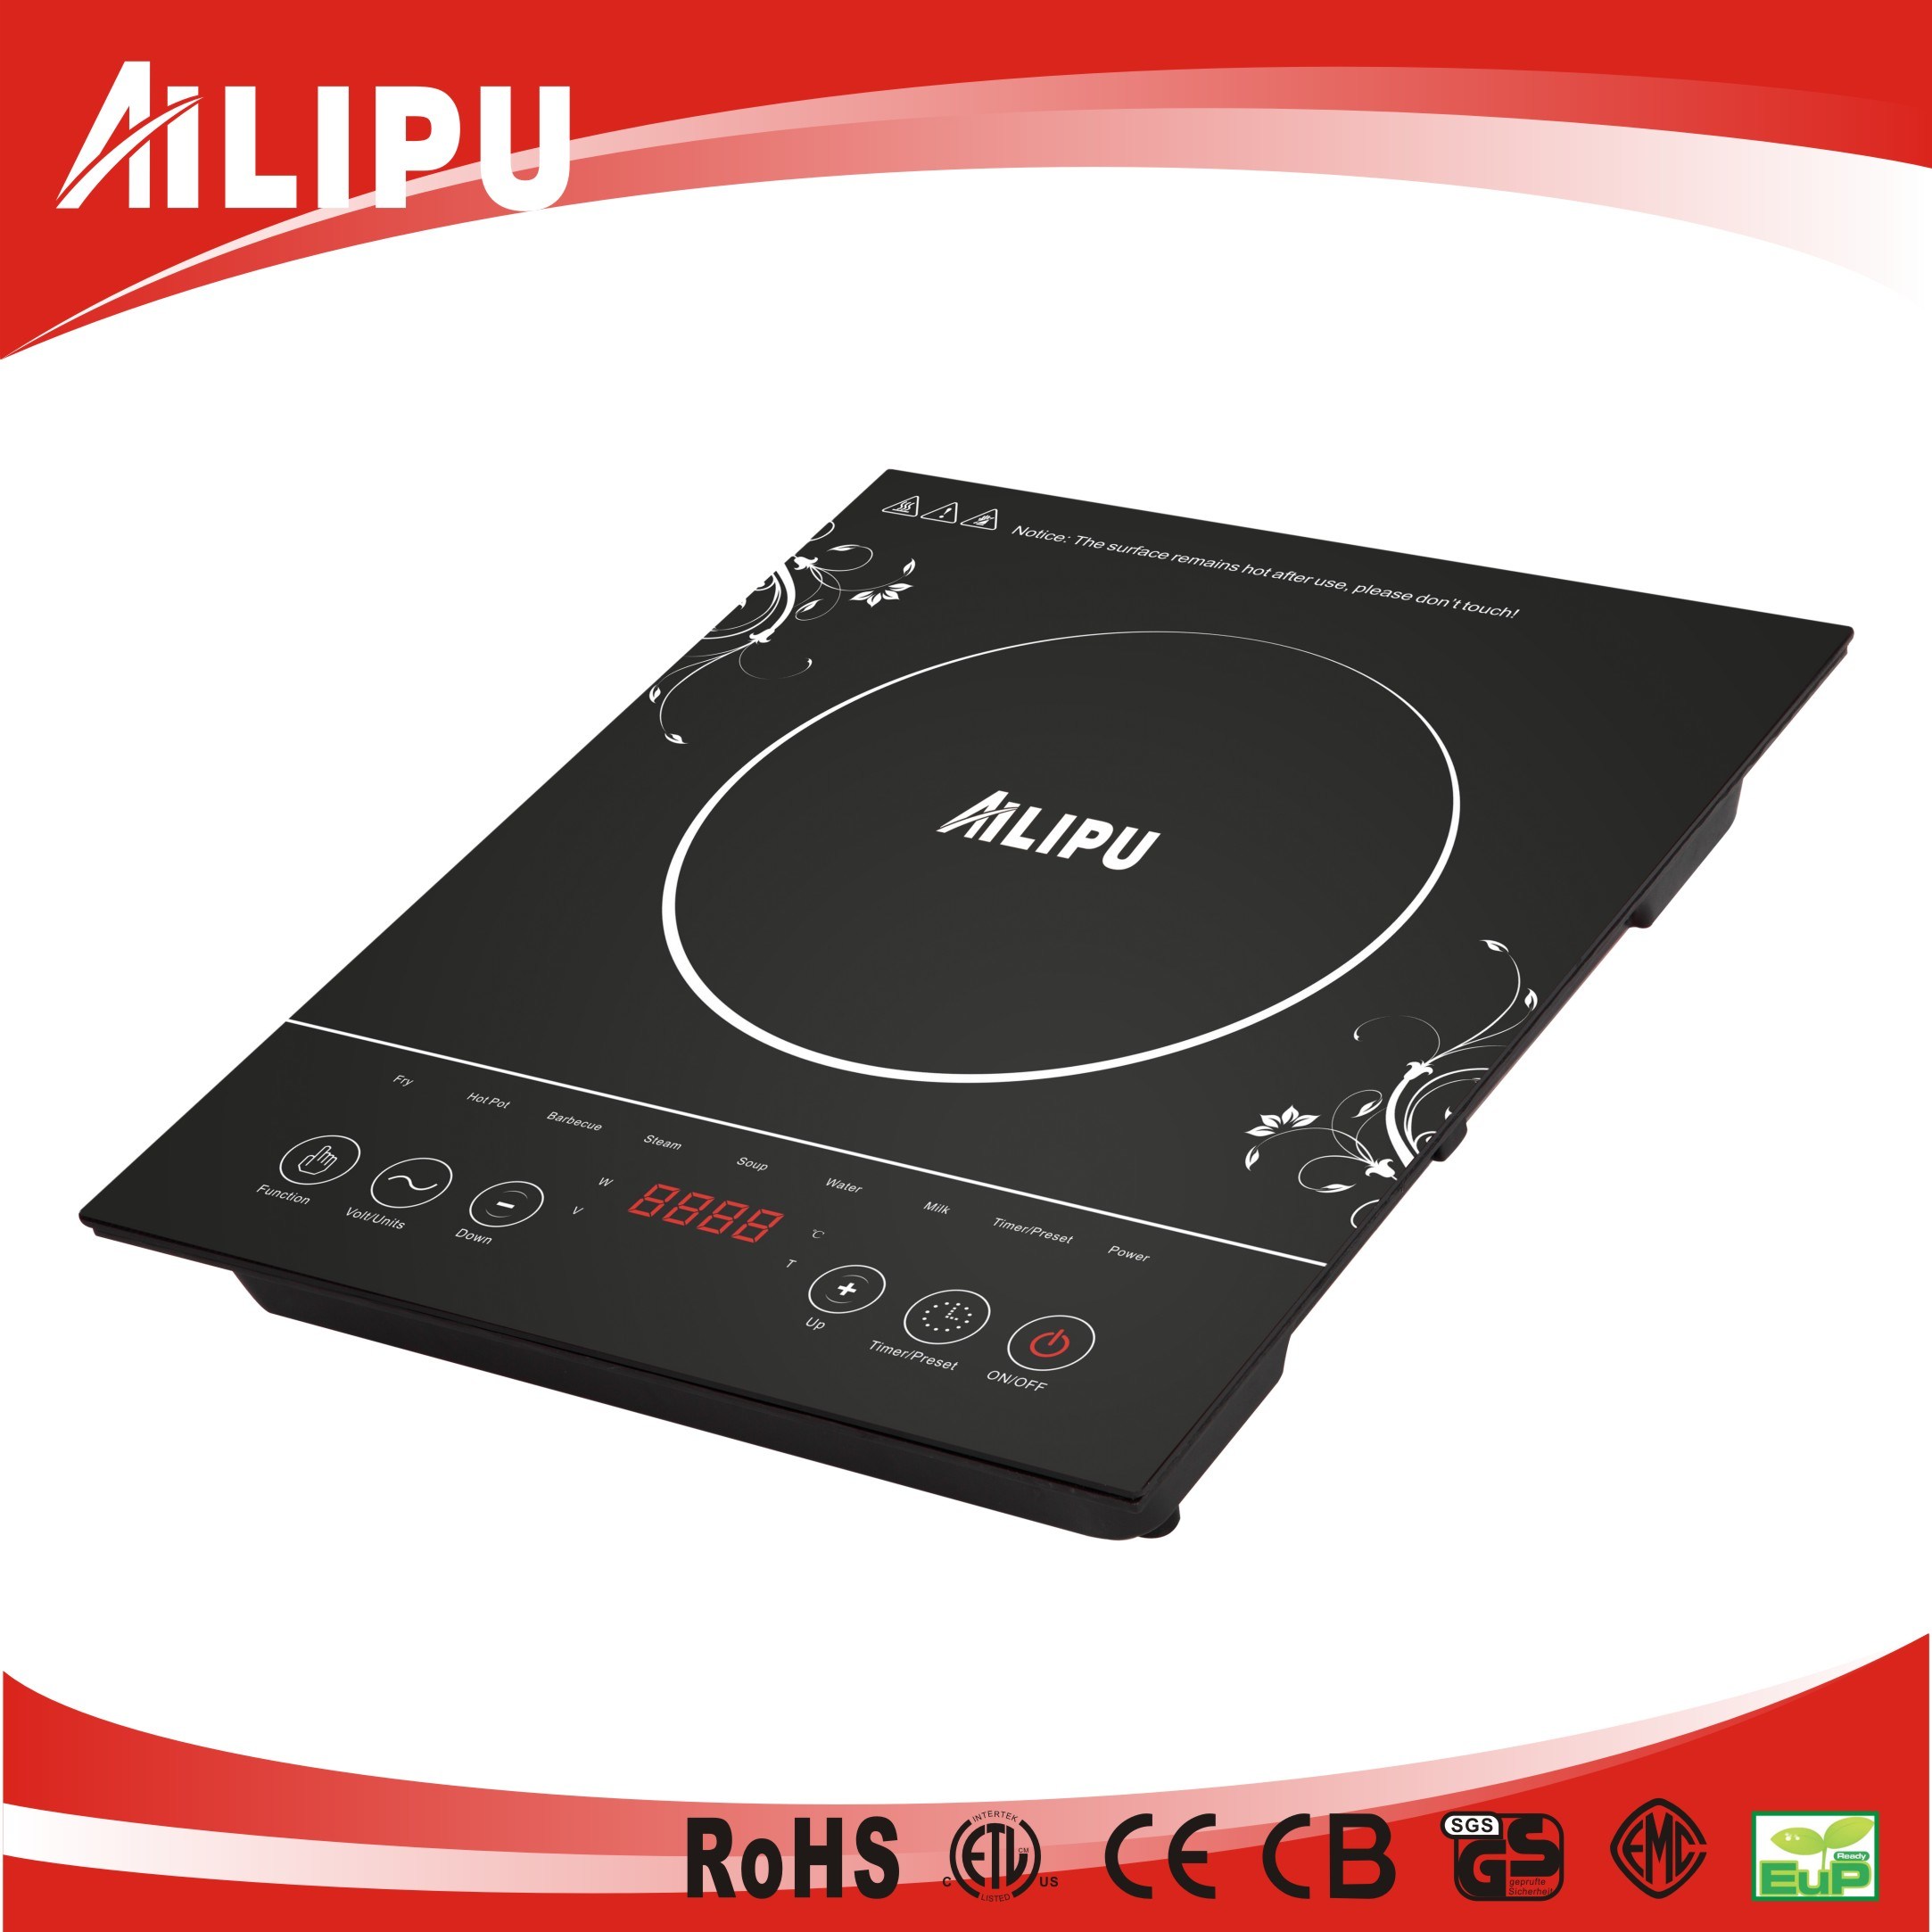 110V/50Hz, Fashion Cookware for Home Appliance, New Product of Kitchenware, Electric Cookware, Induction Plate, Promotional Gift (SM-A79)